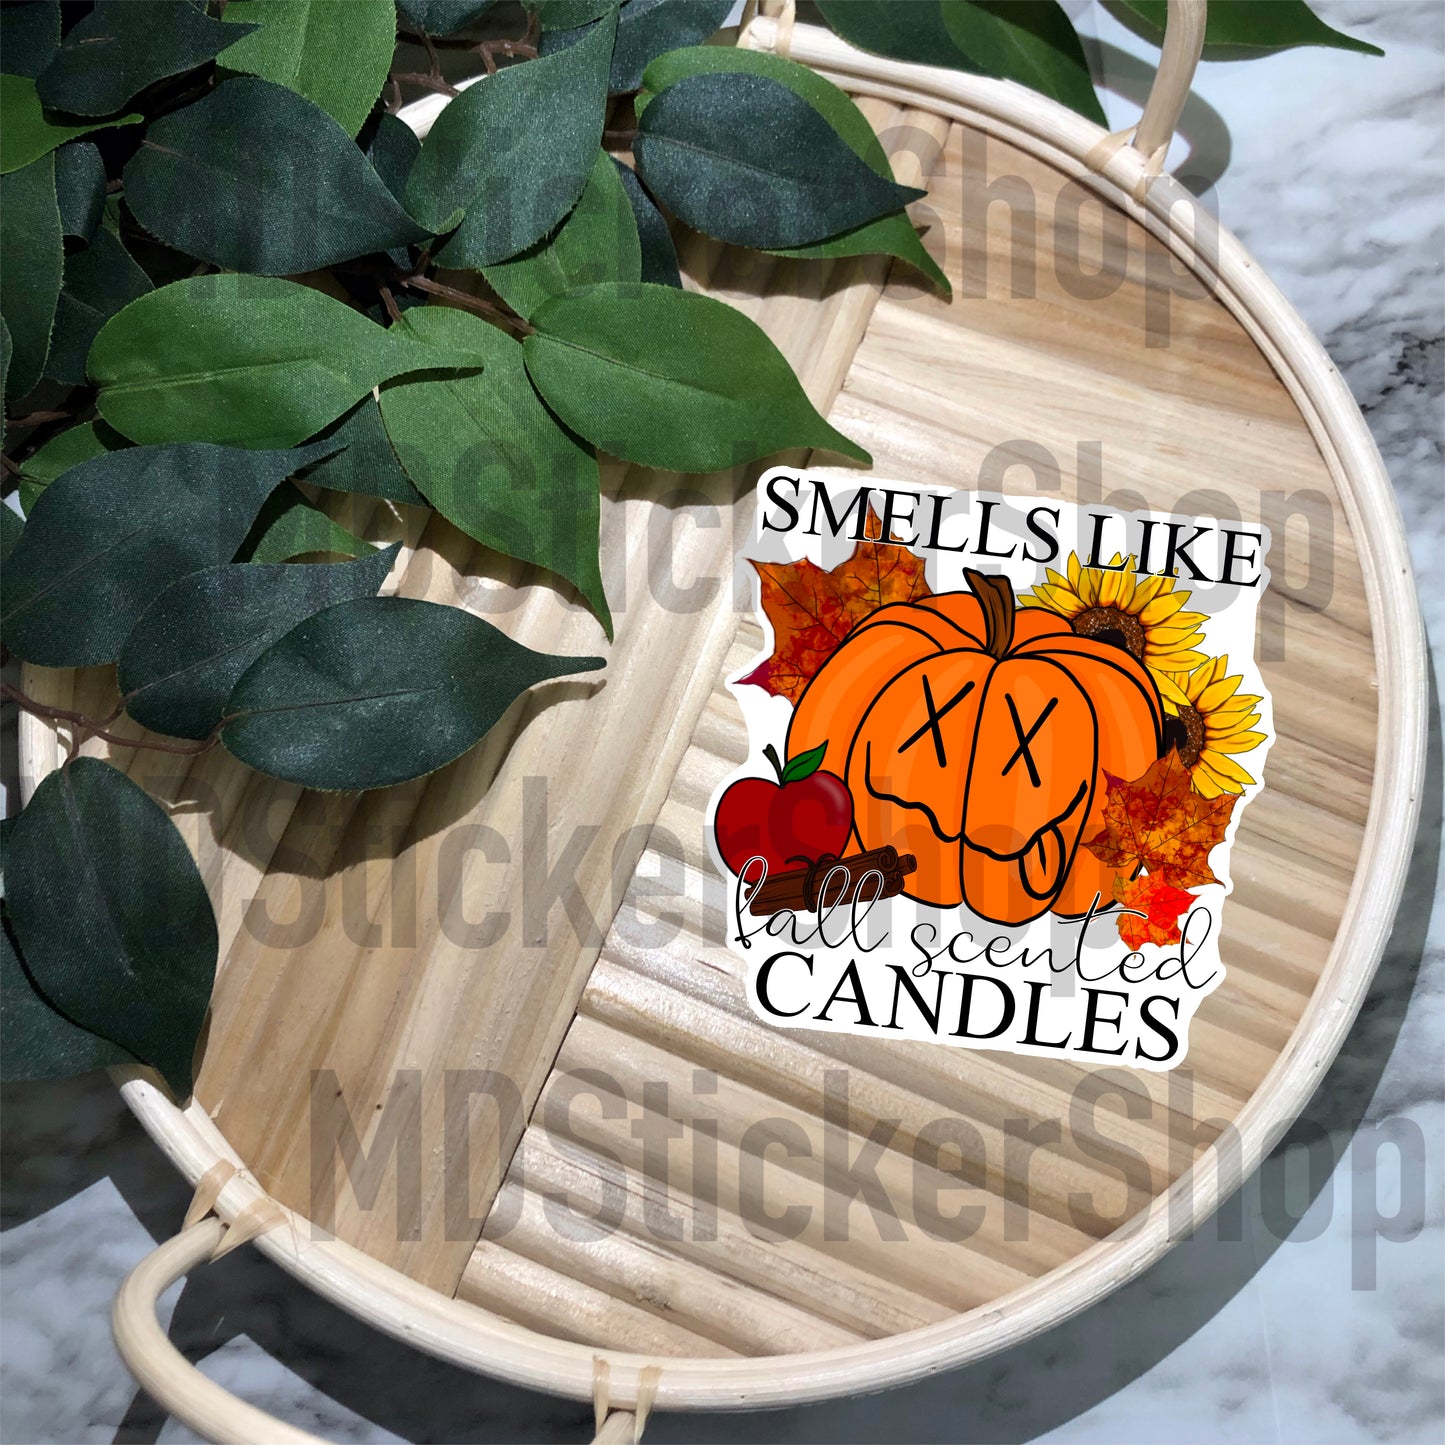 Smells Like Fall Scented Candles Vinyl Sticker